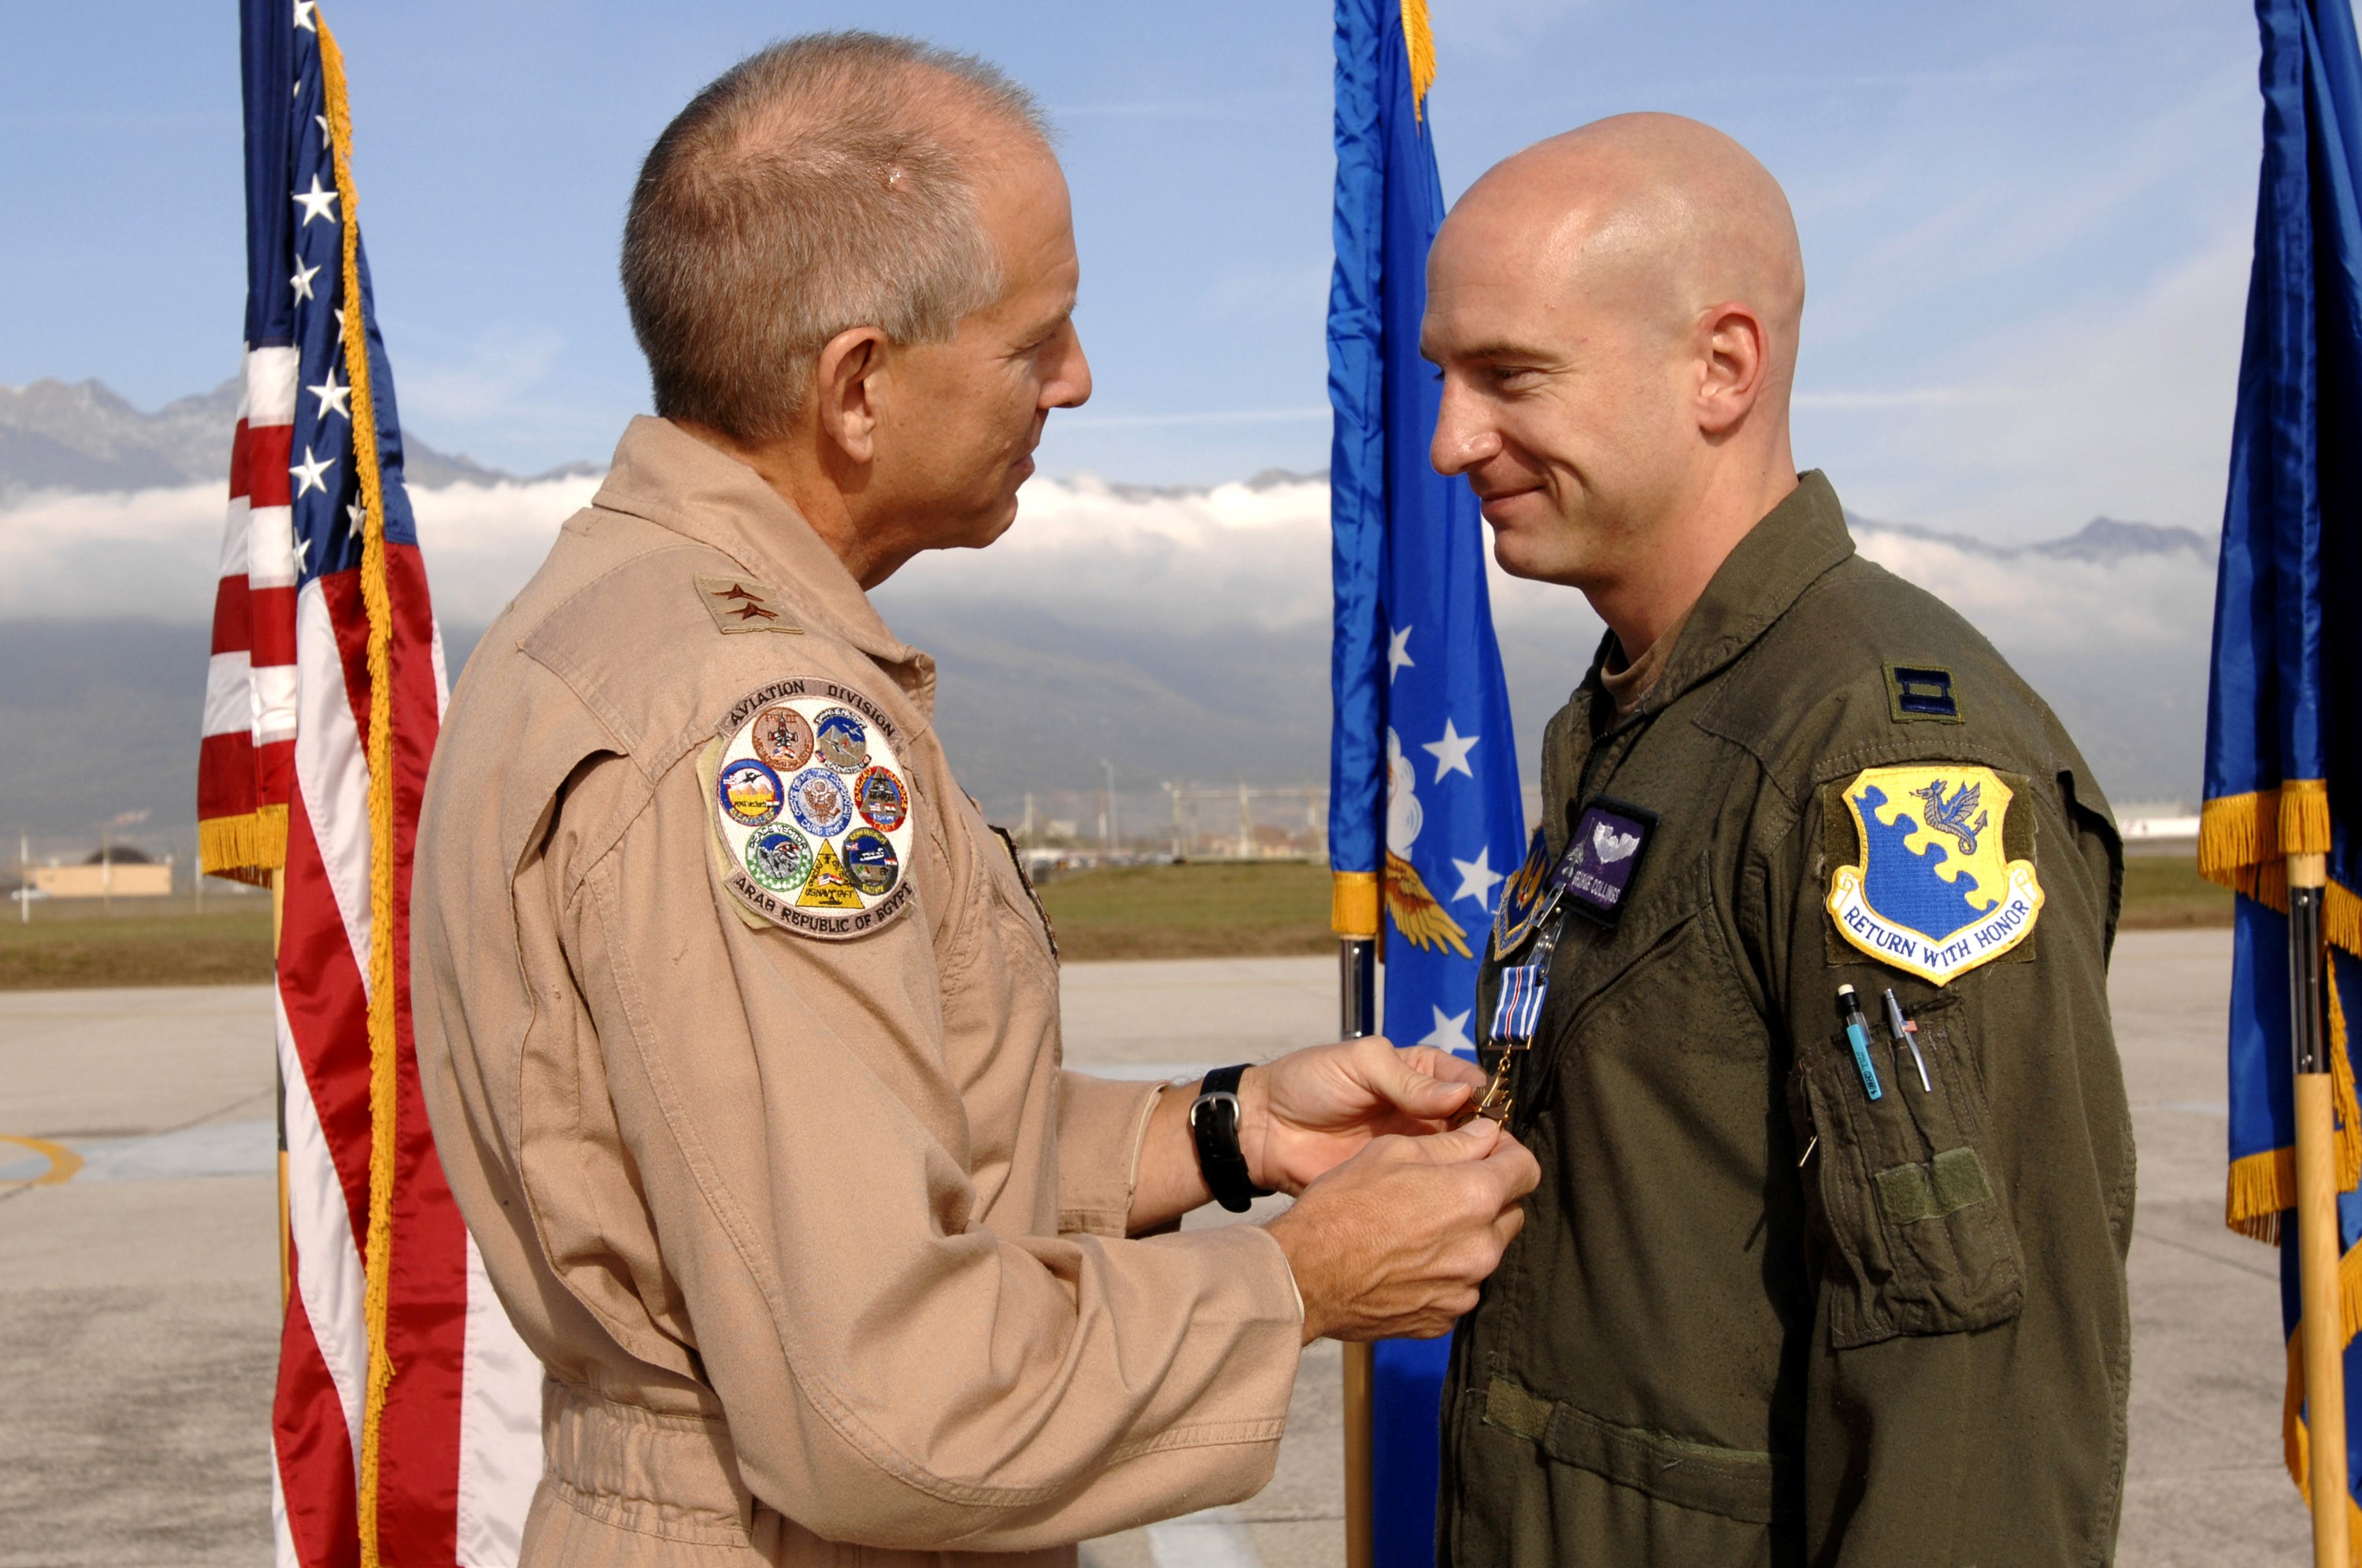 Picture of Capt  GeorgeCollings receiving the Distinguished Flying Cross from his father  Maj. Gen. Michael Collings.